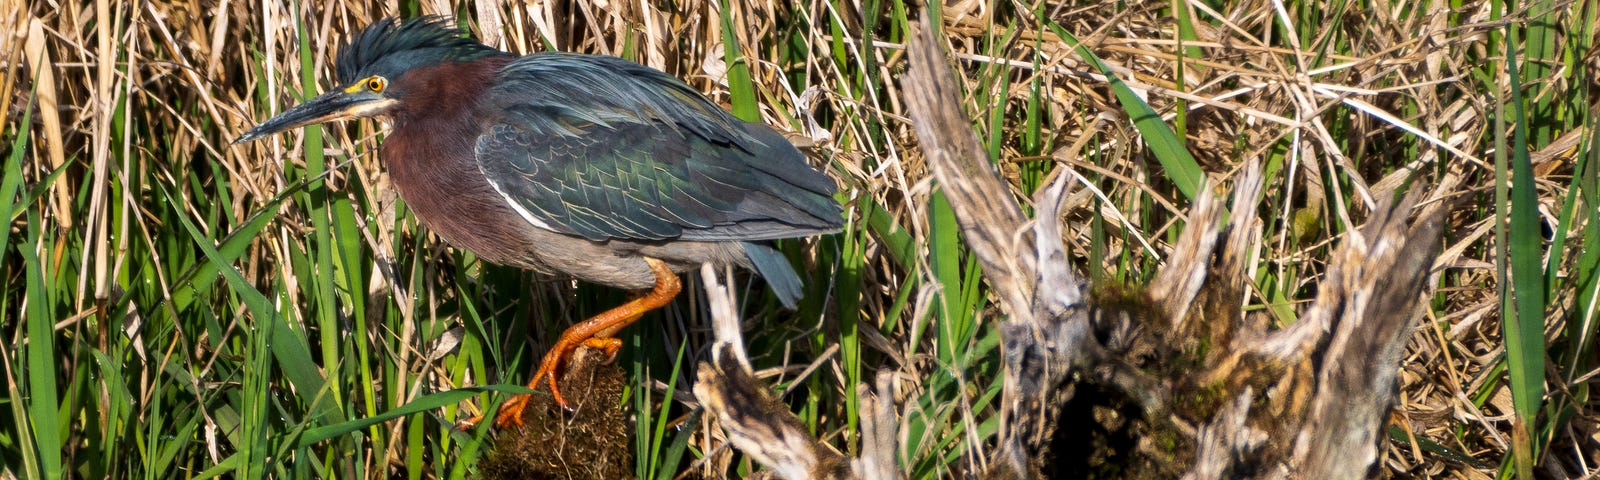 Green Heron perched on a stump.